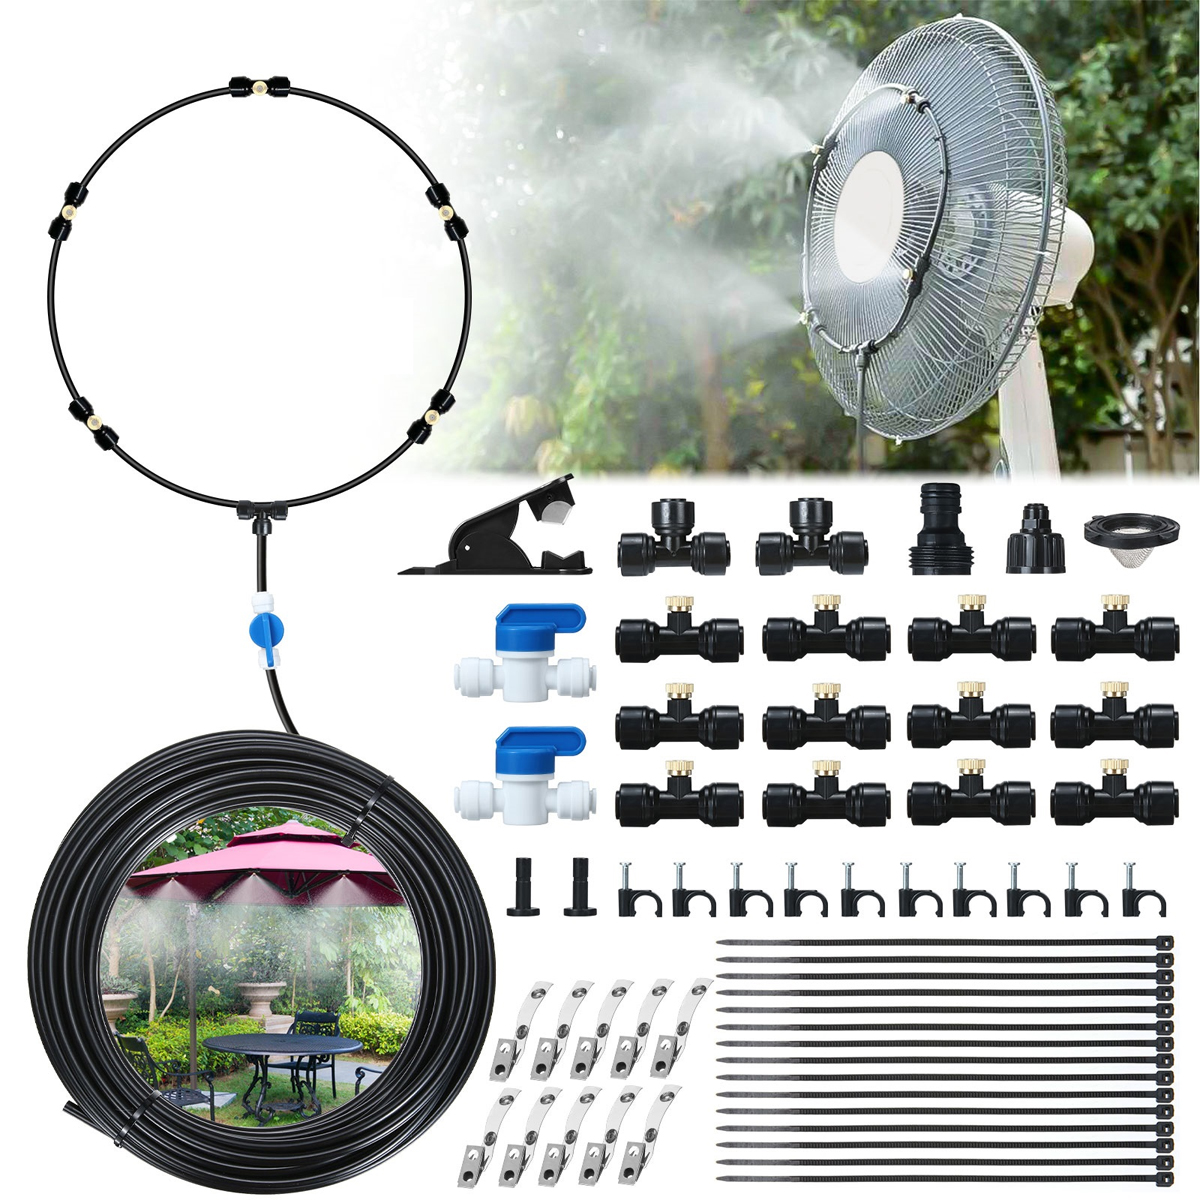 44PCS-15FT-Misting-Cooling-System-PE-Spray-Water-Systemfor-Garden-Landscaping-Greenhouse-1884554-2